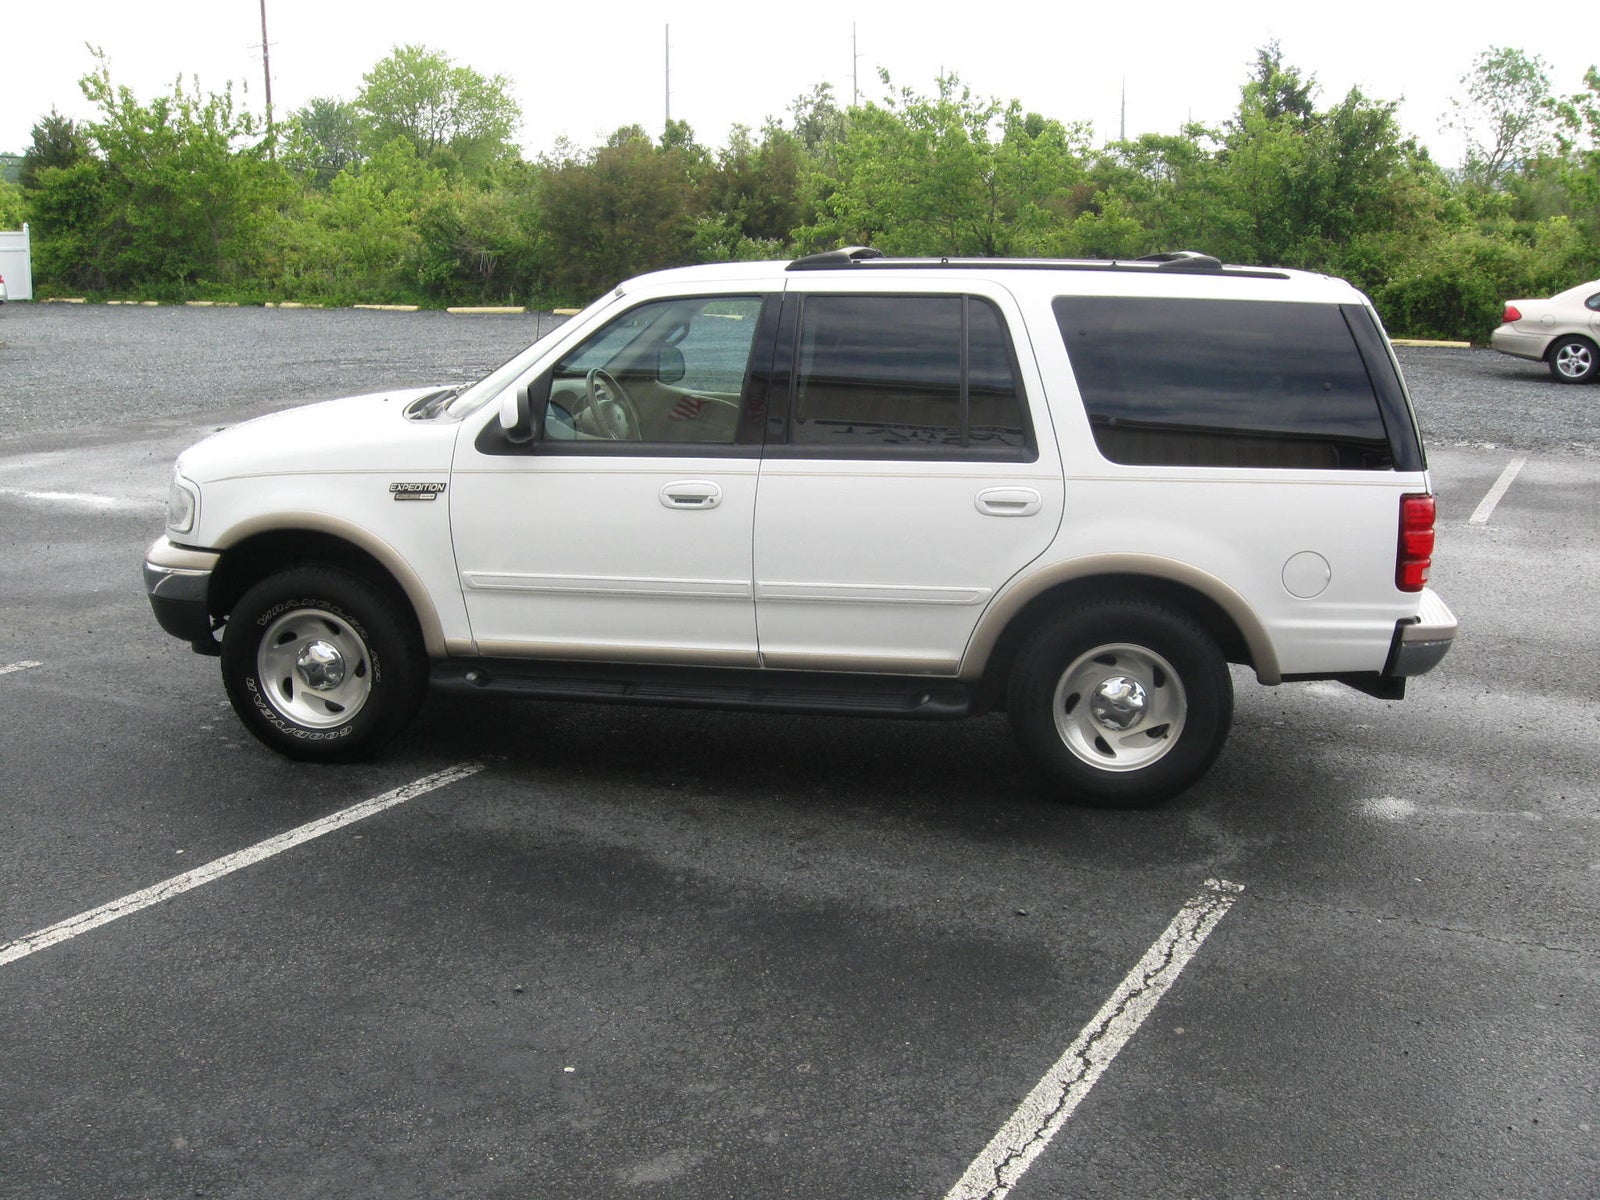 1999 Ford expedition cargo dimensions #4